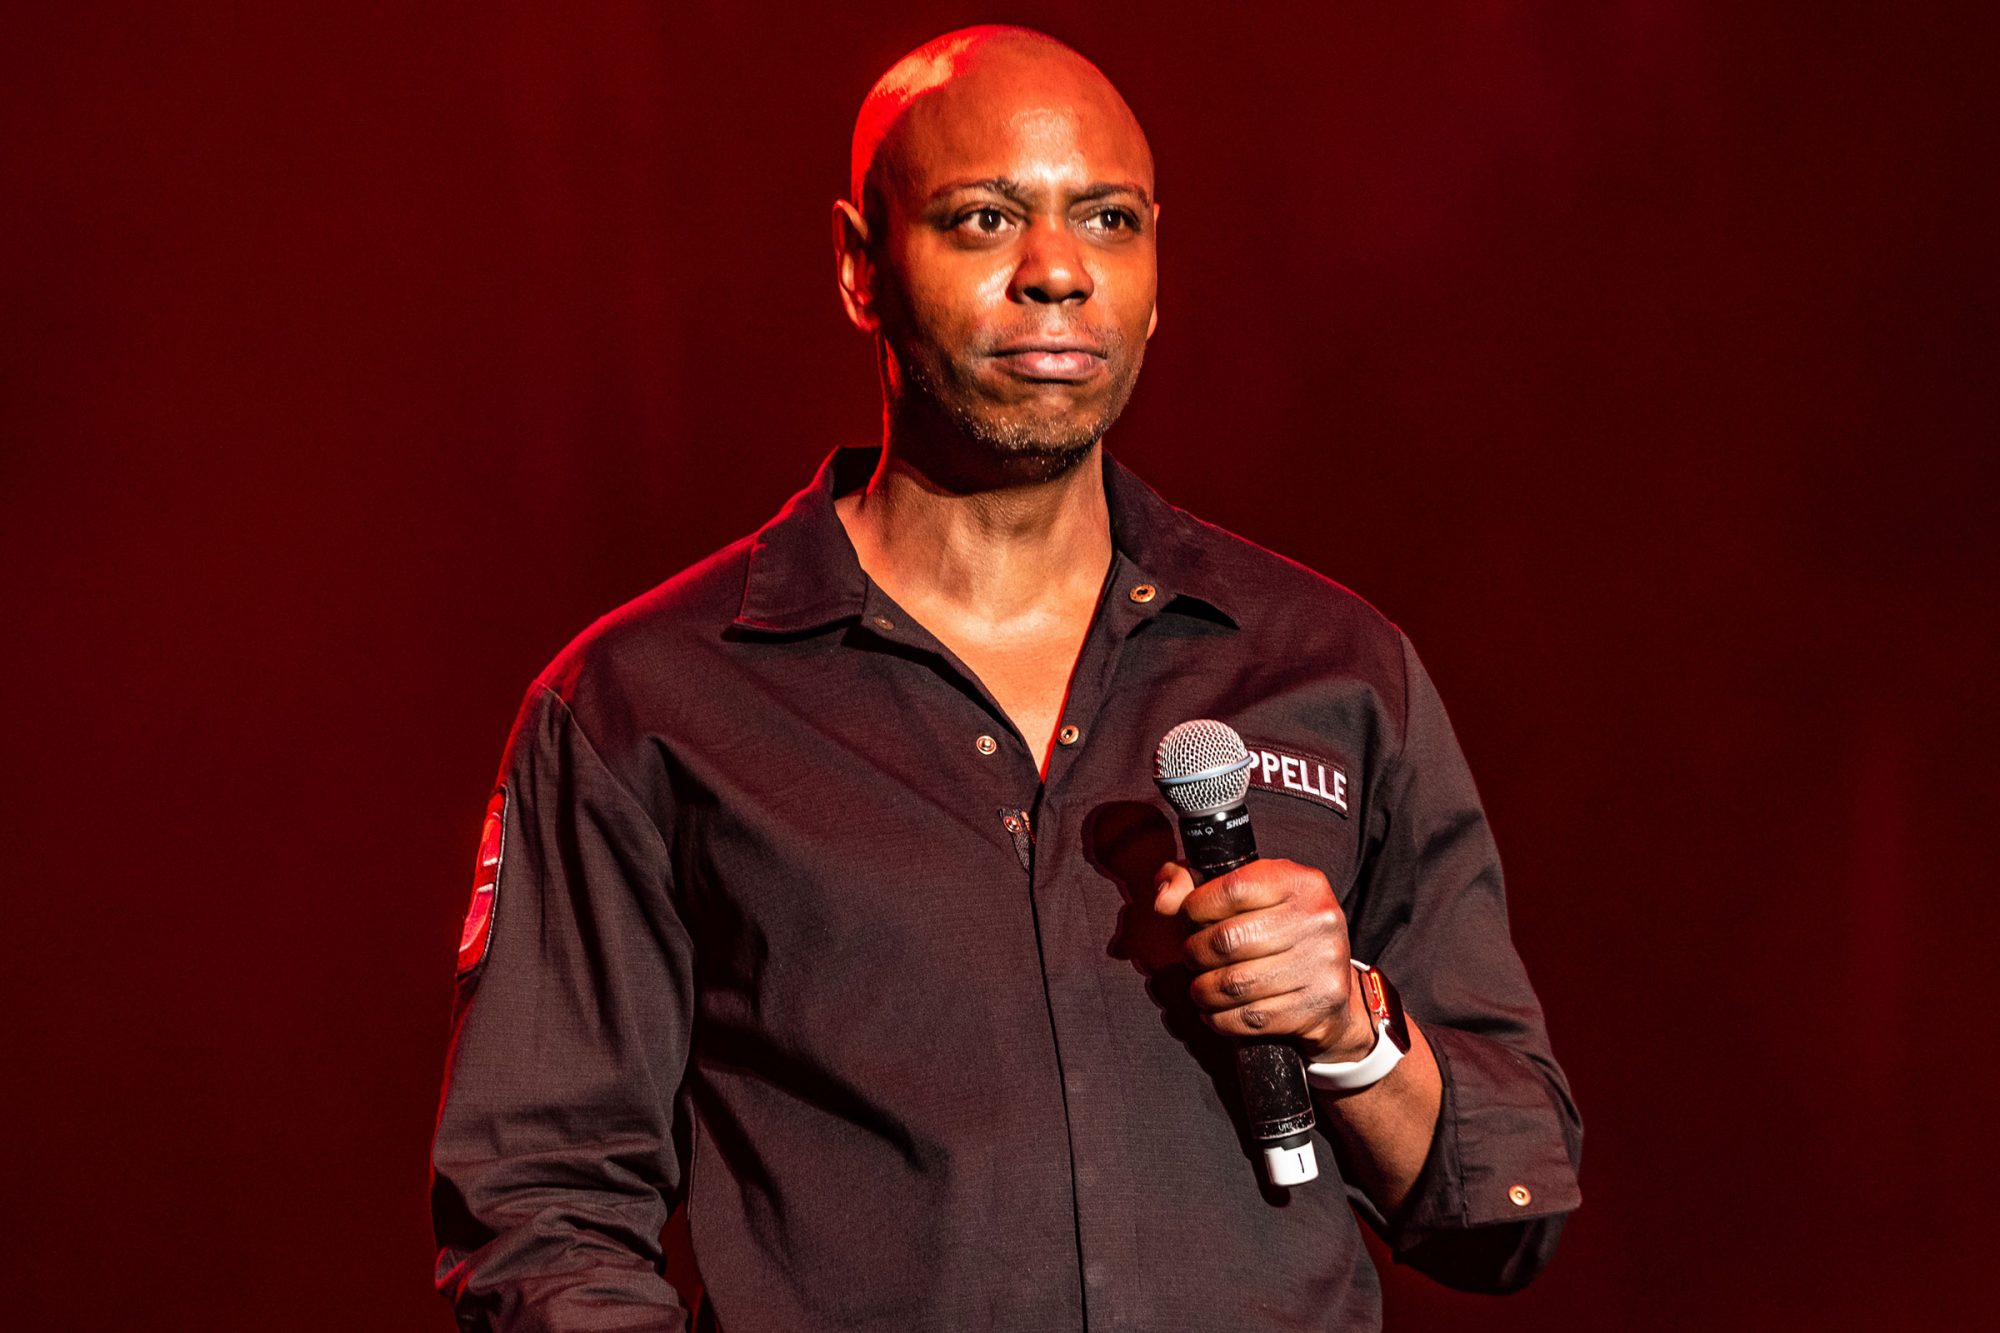 Dave Chappelle Wiki, Bio, Age, Net Worth, and Other Facts